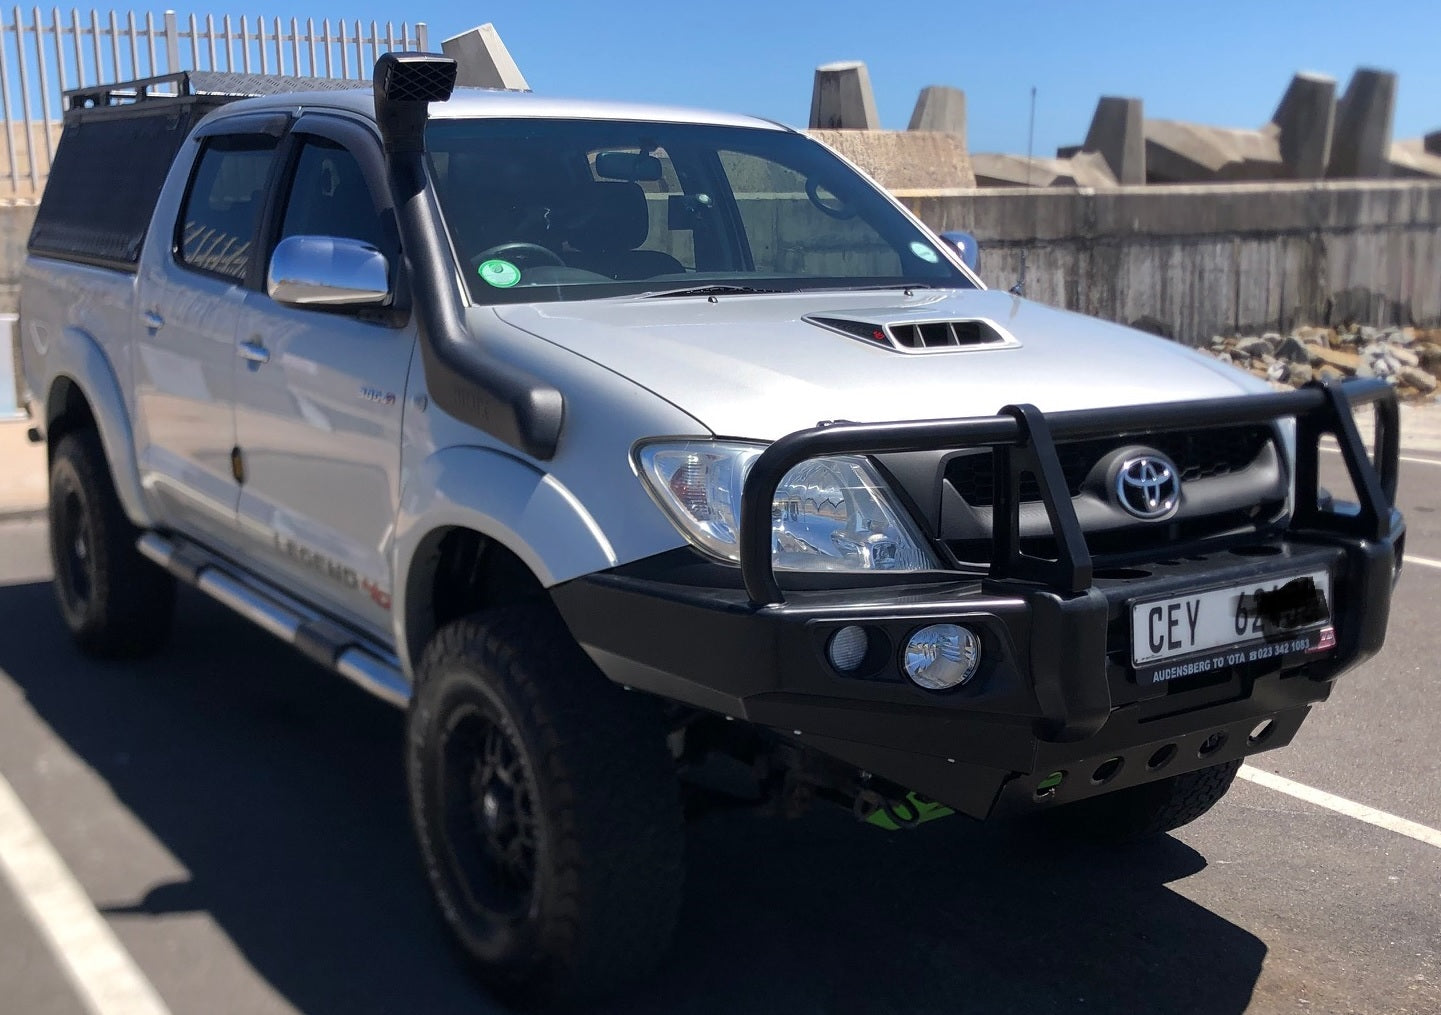 Toyota Hilux Vigo D4D 2005 – 2011: MCC Post Type Front Bumper Replacement Bullbar (No bumper cut) (Can also fit a Fortuner 2005-2011) (Bullbar + bracket kit + under protection plates) – POSTHI05